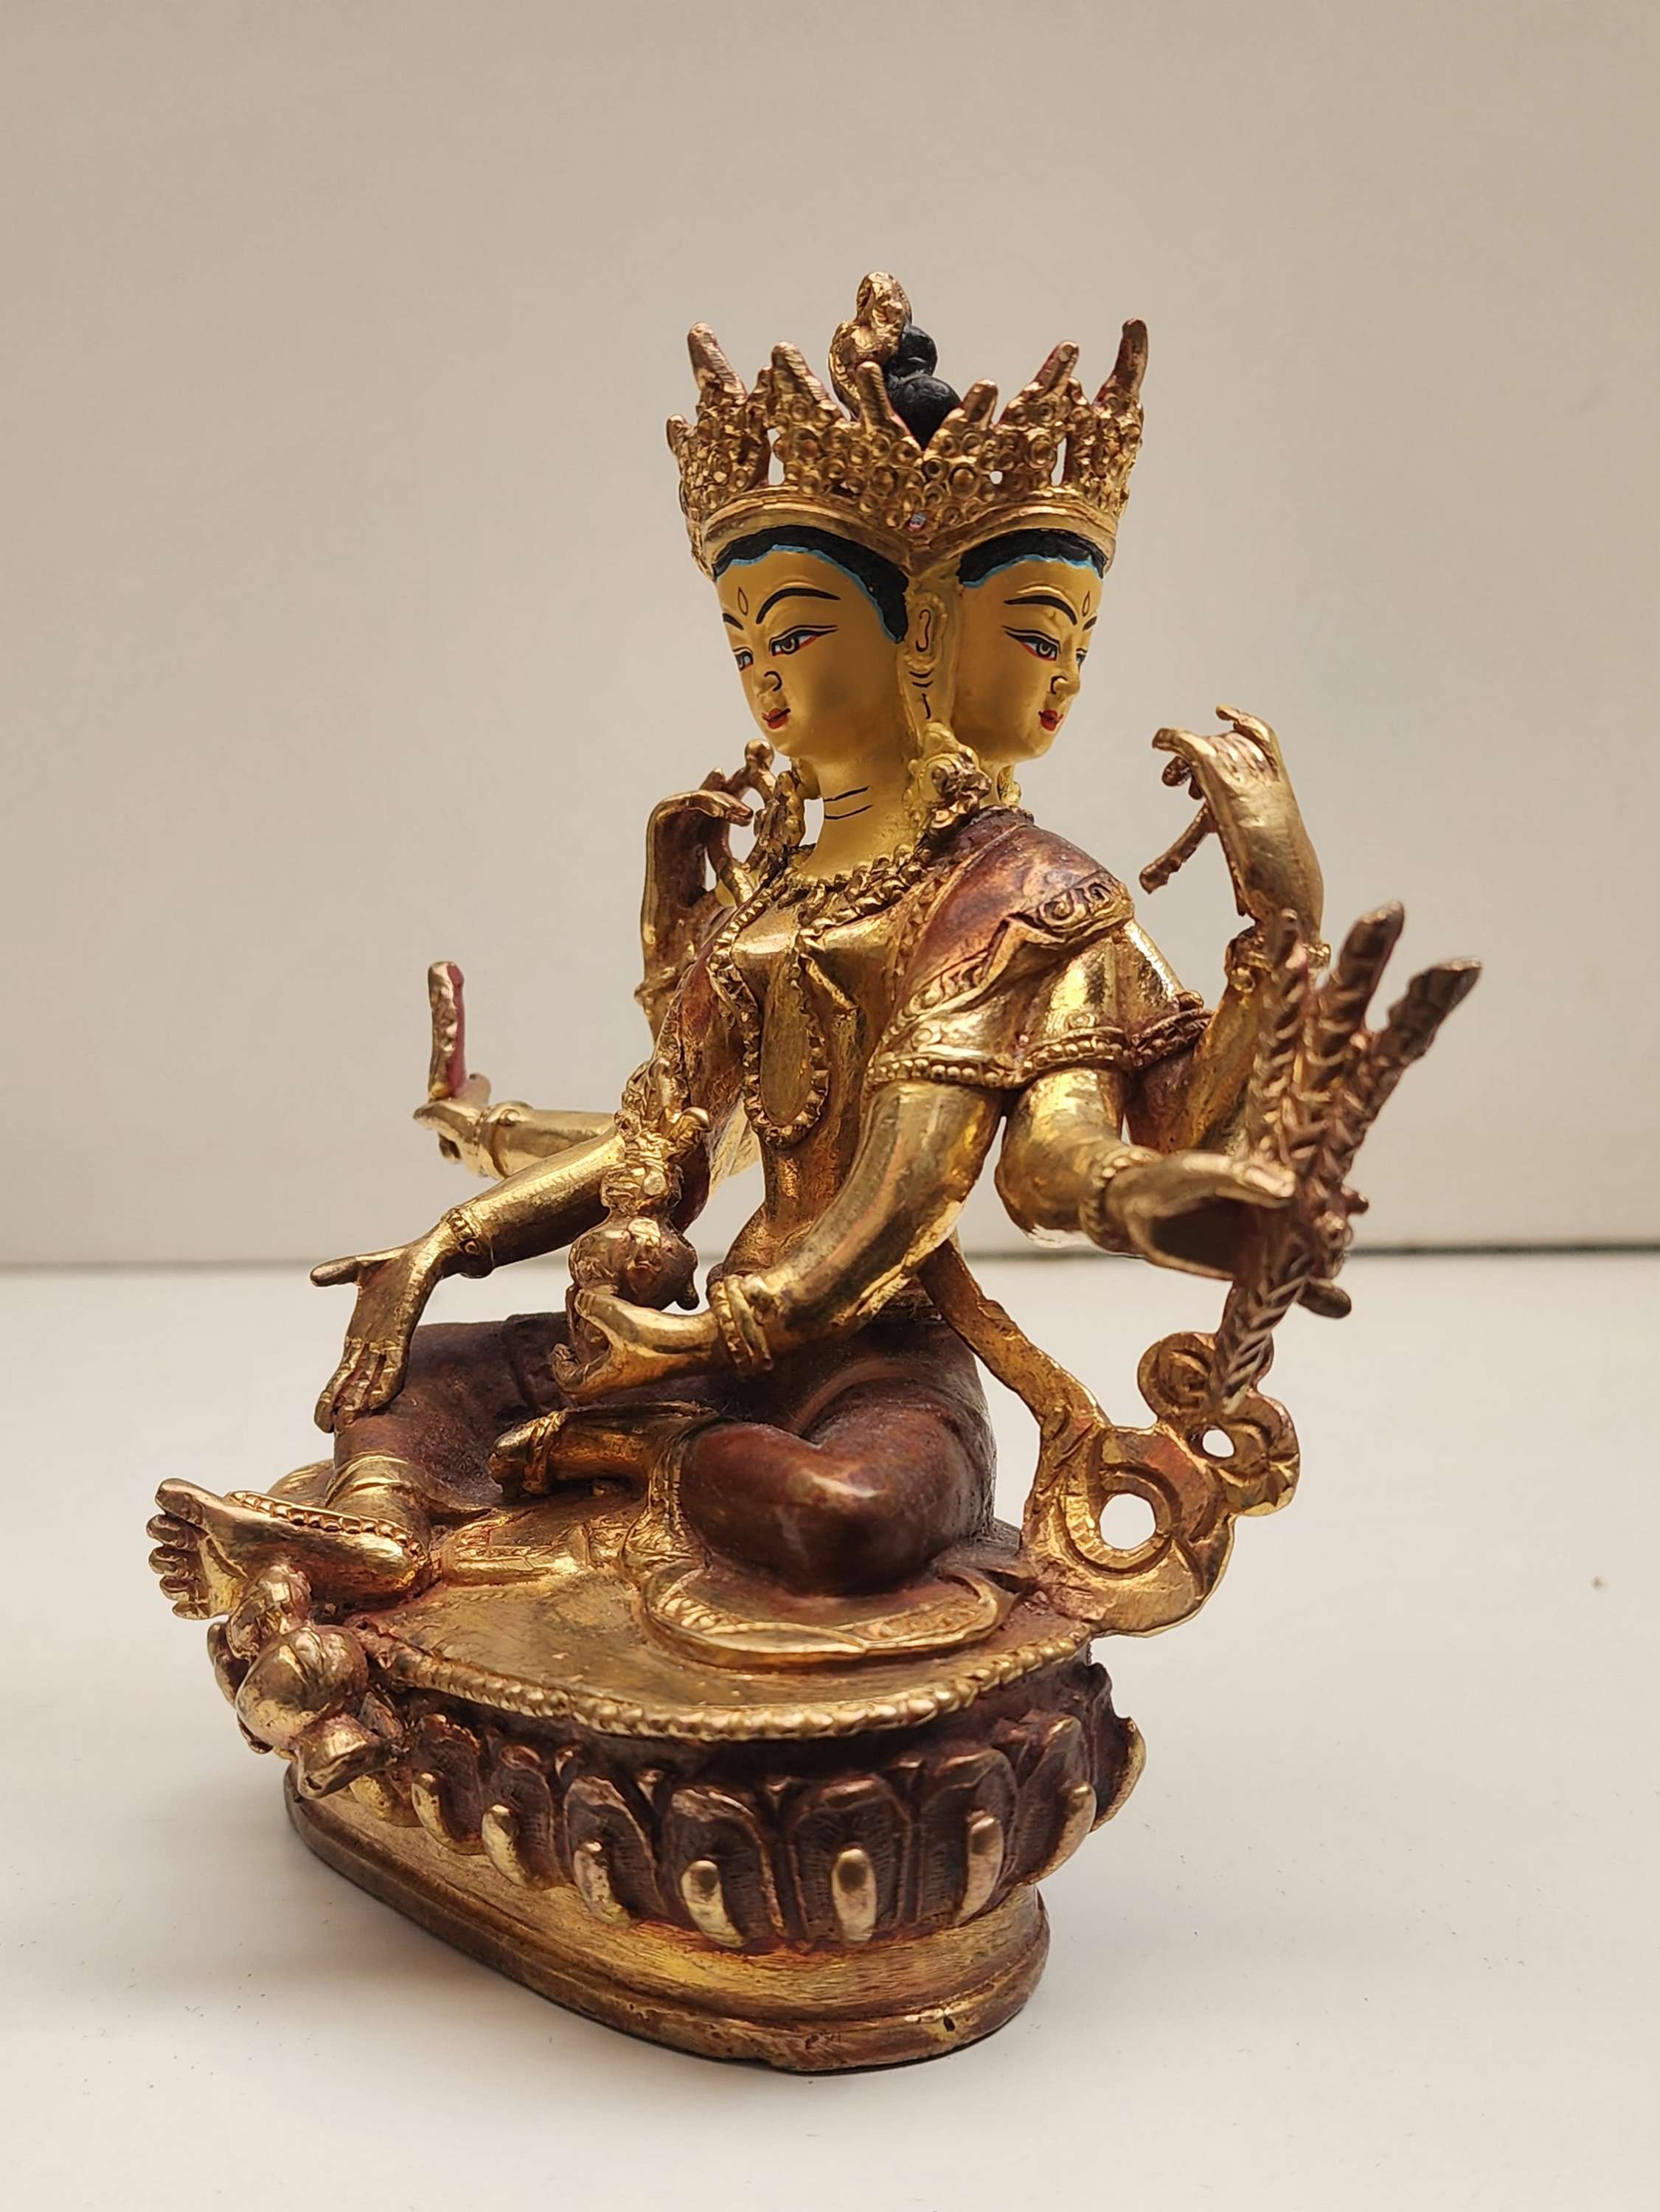 Buddhist Handmade Statue Of vasundhara, partly Gold Plated, face Painted